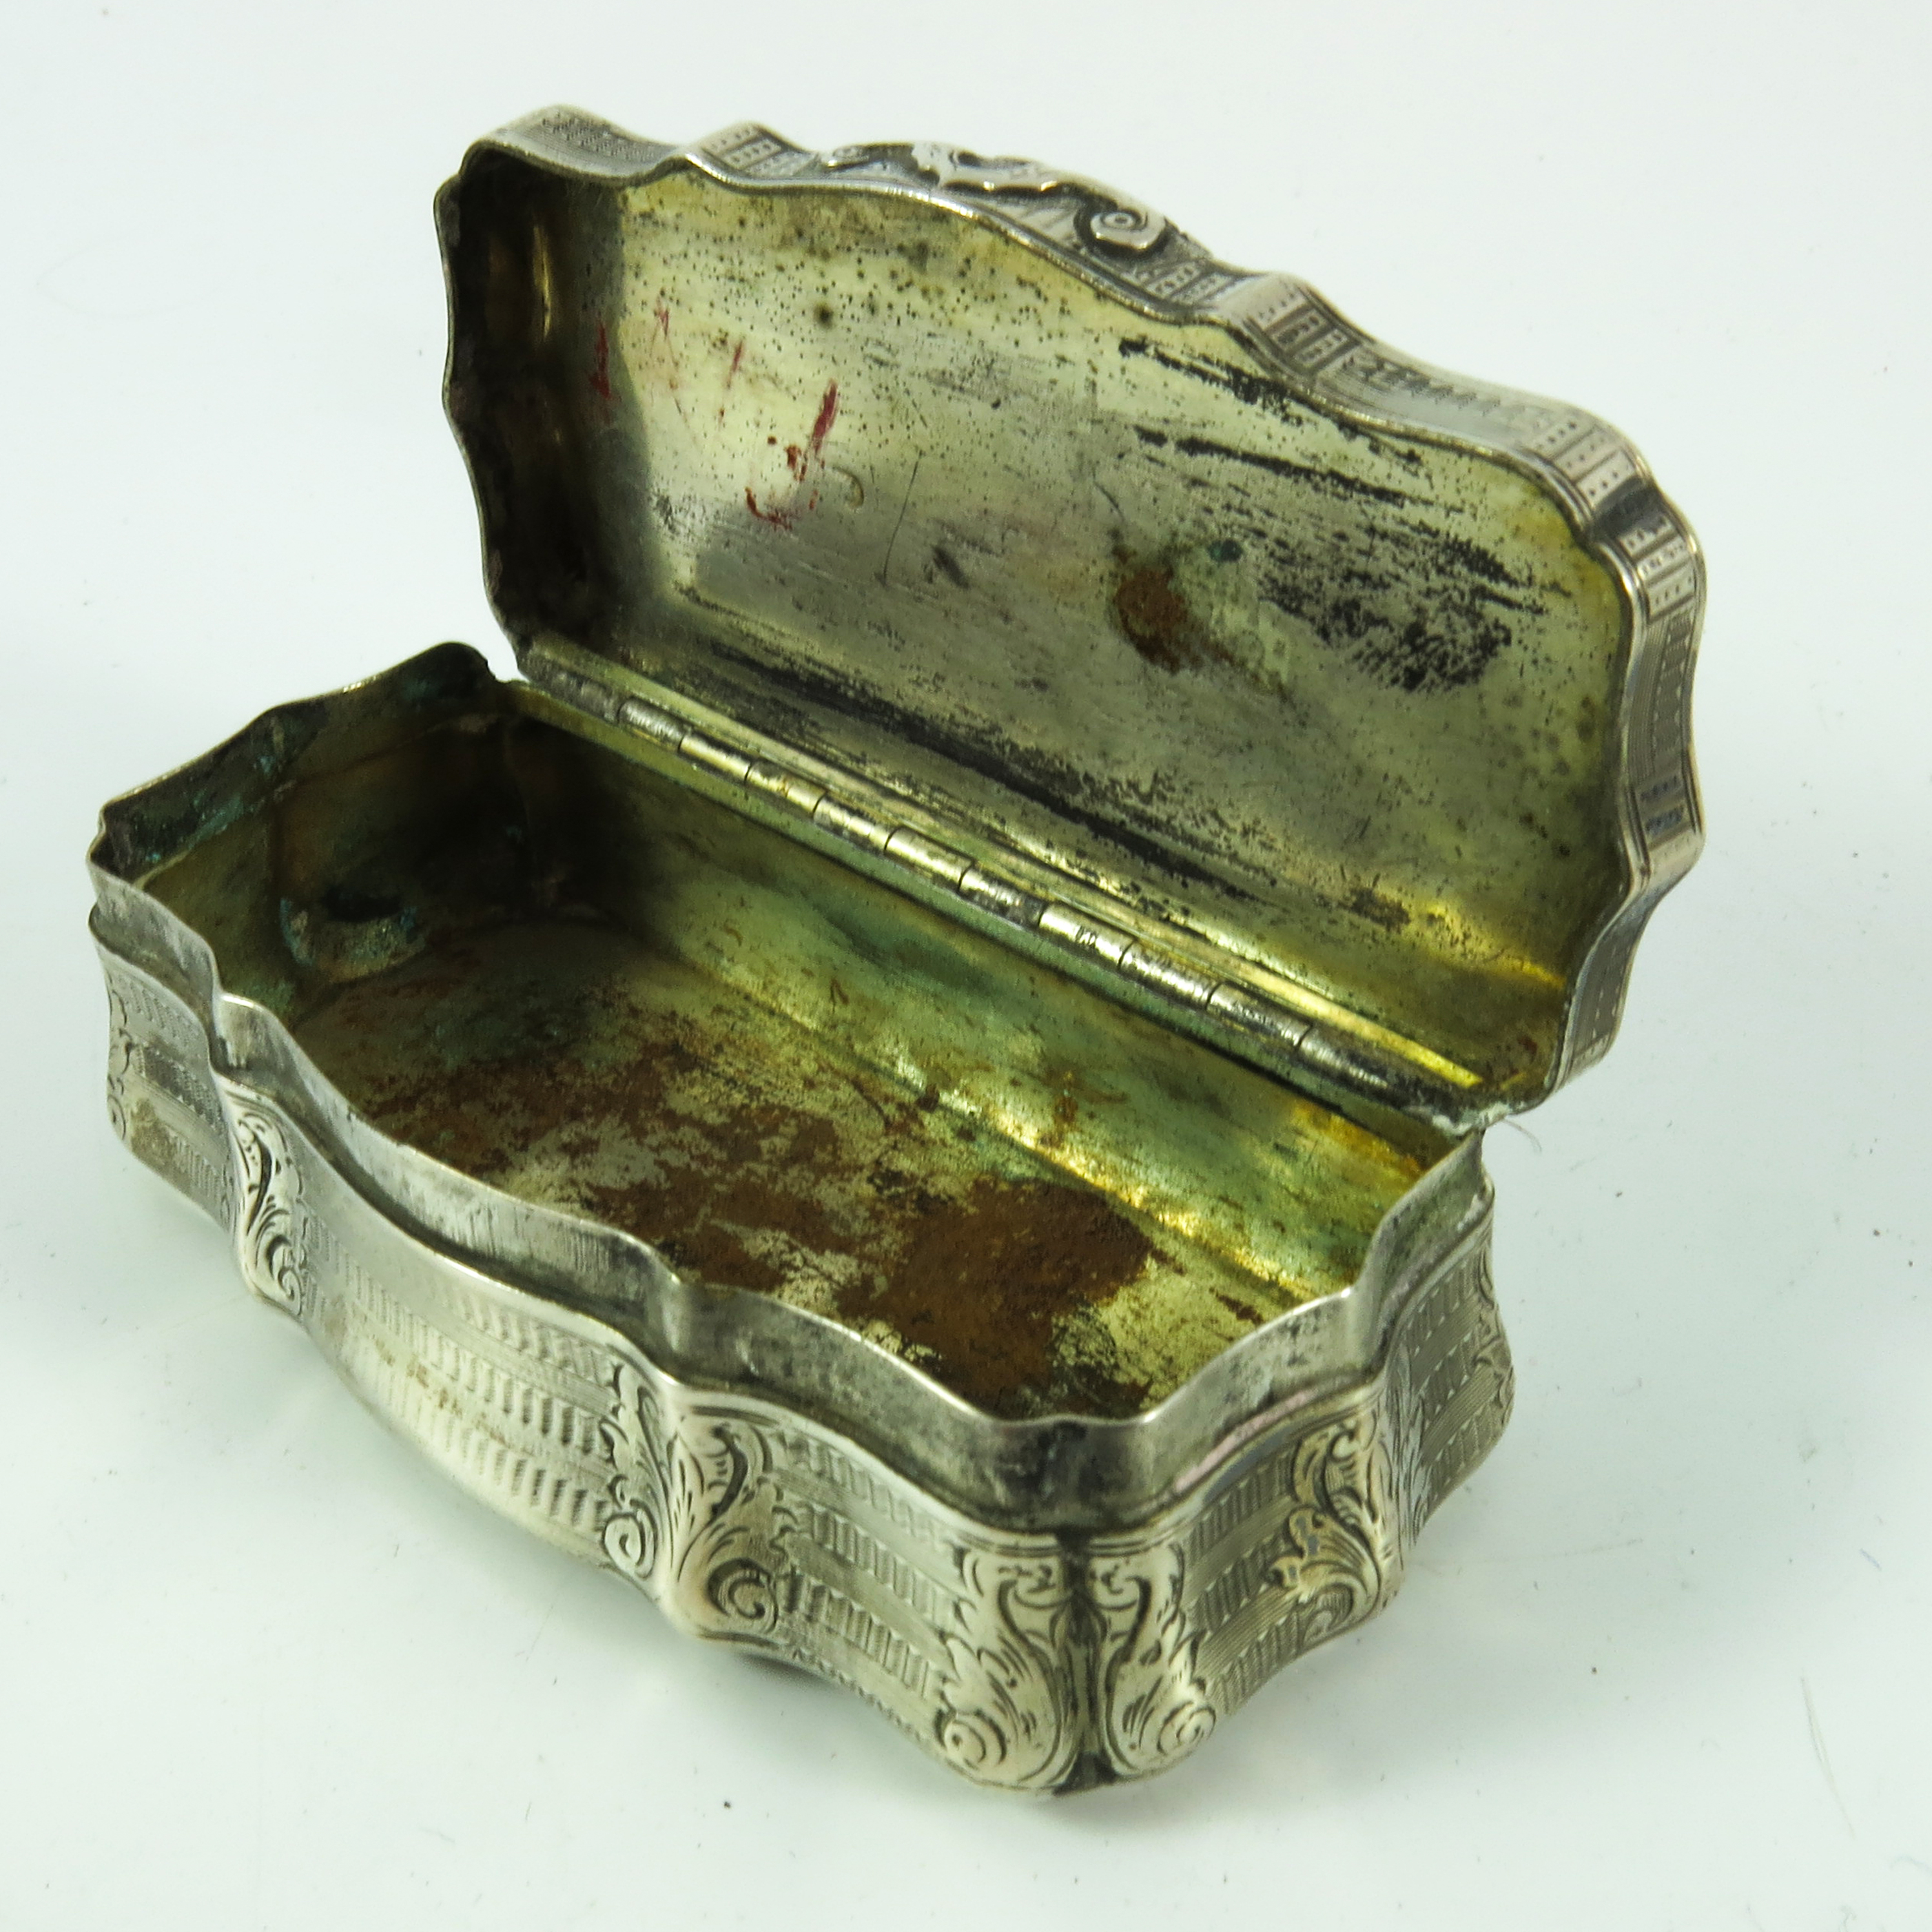 CONTINENTAL, POSSIBLY DUTCH, WHITE METAL TRINKET BOX WITH HINGED COVER - Image 5 of 6